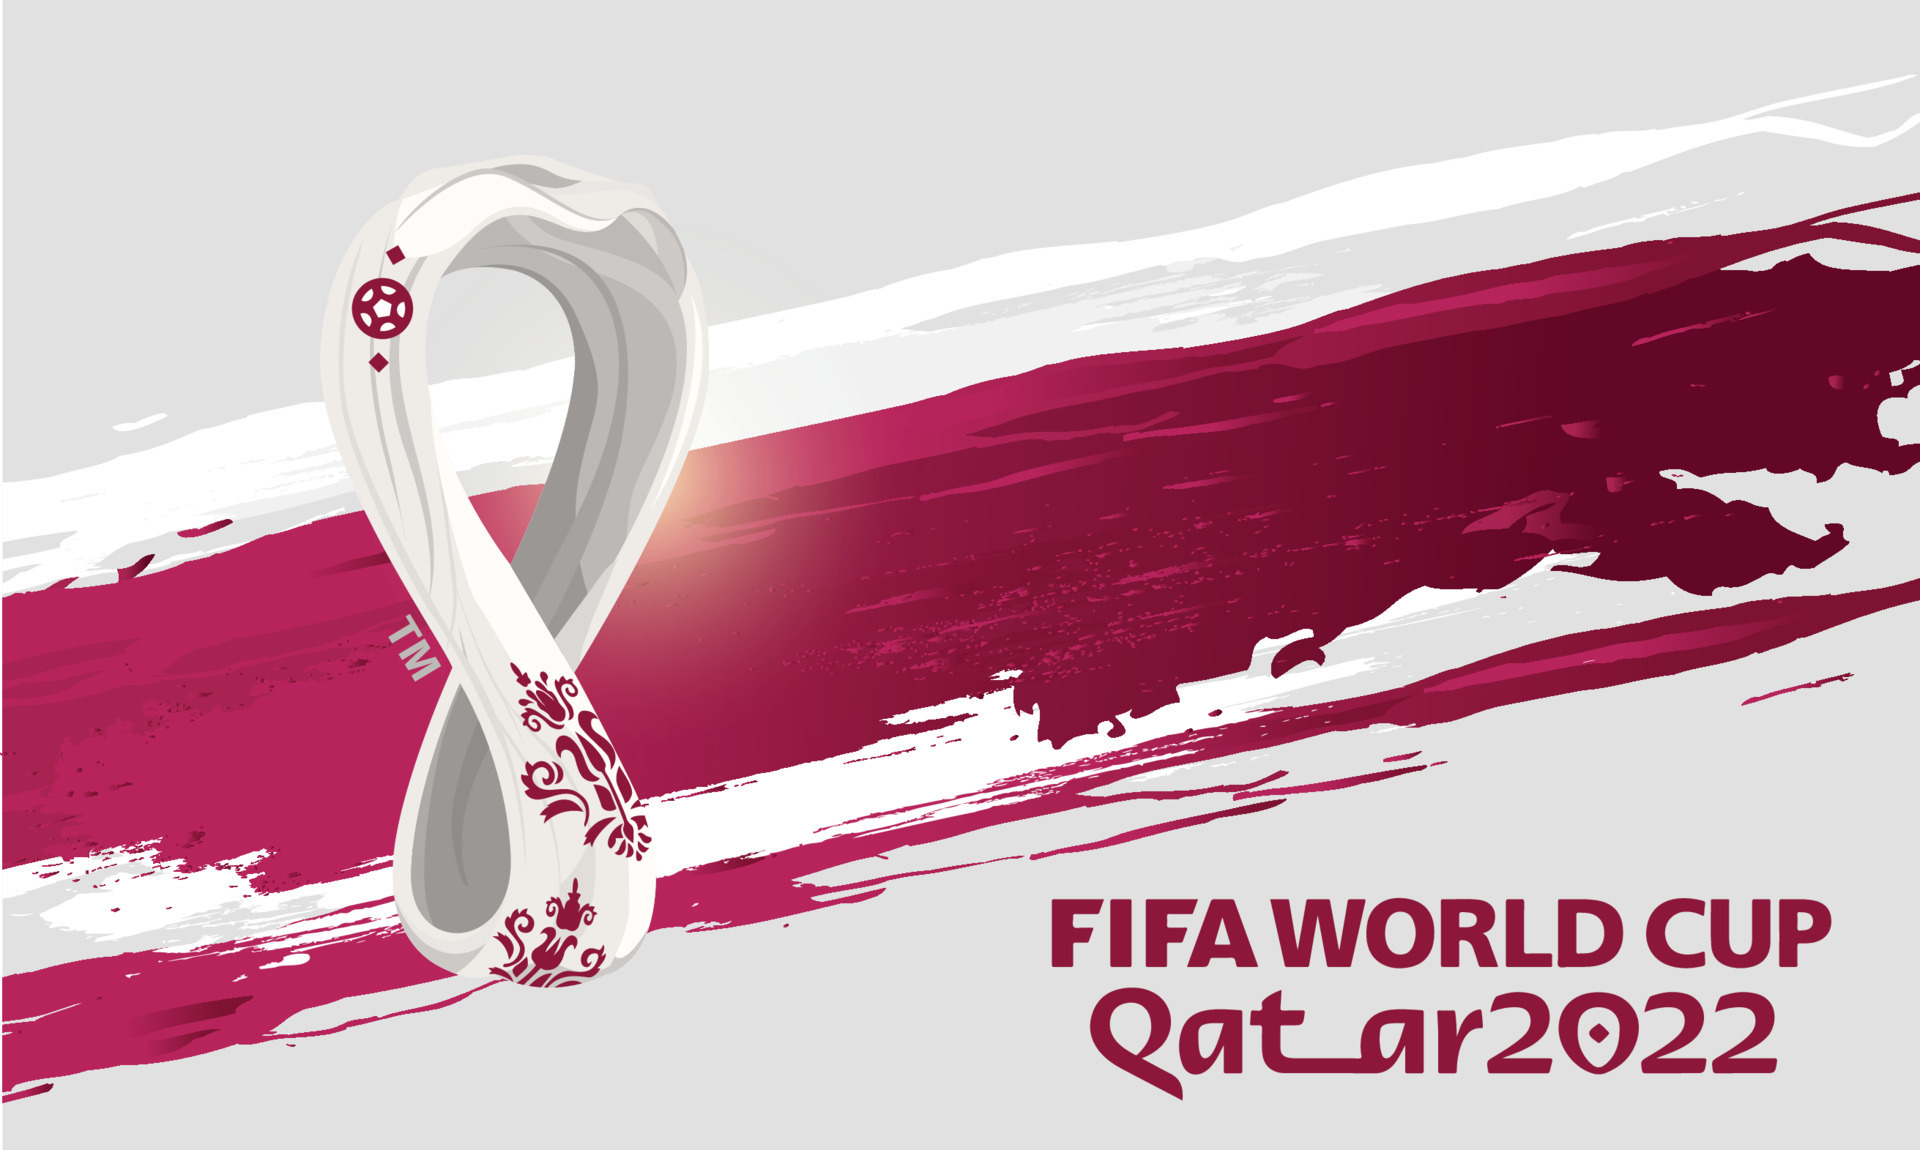 World Cup Qatar Wallpapers Wallpaper Cave 0890